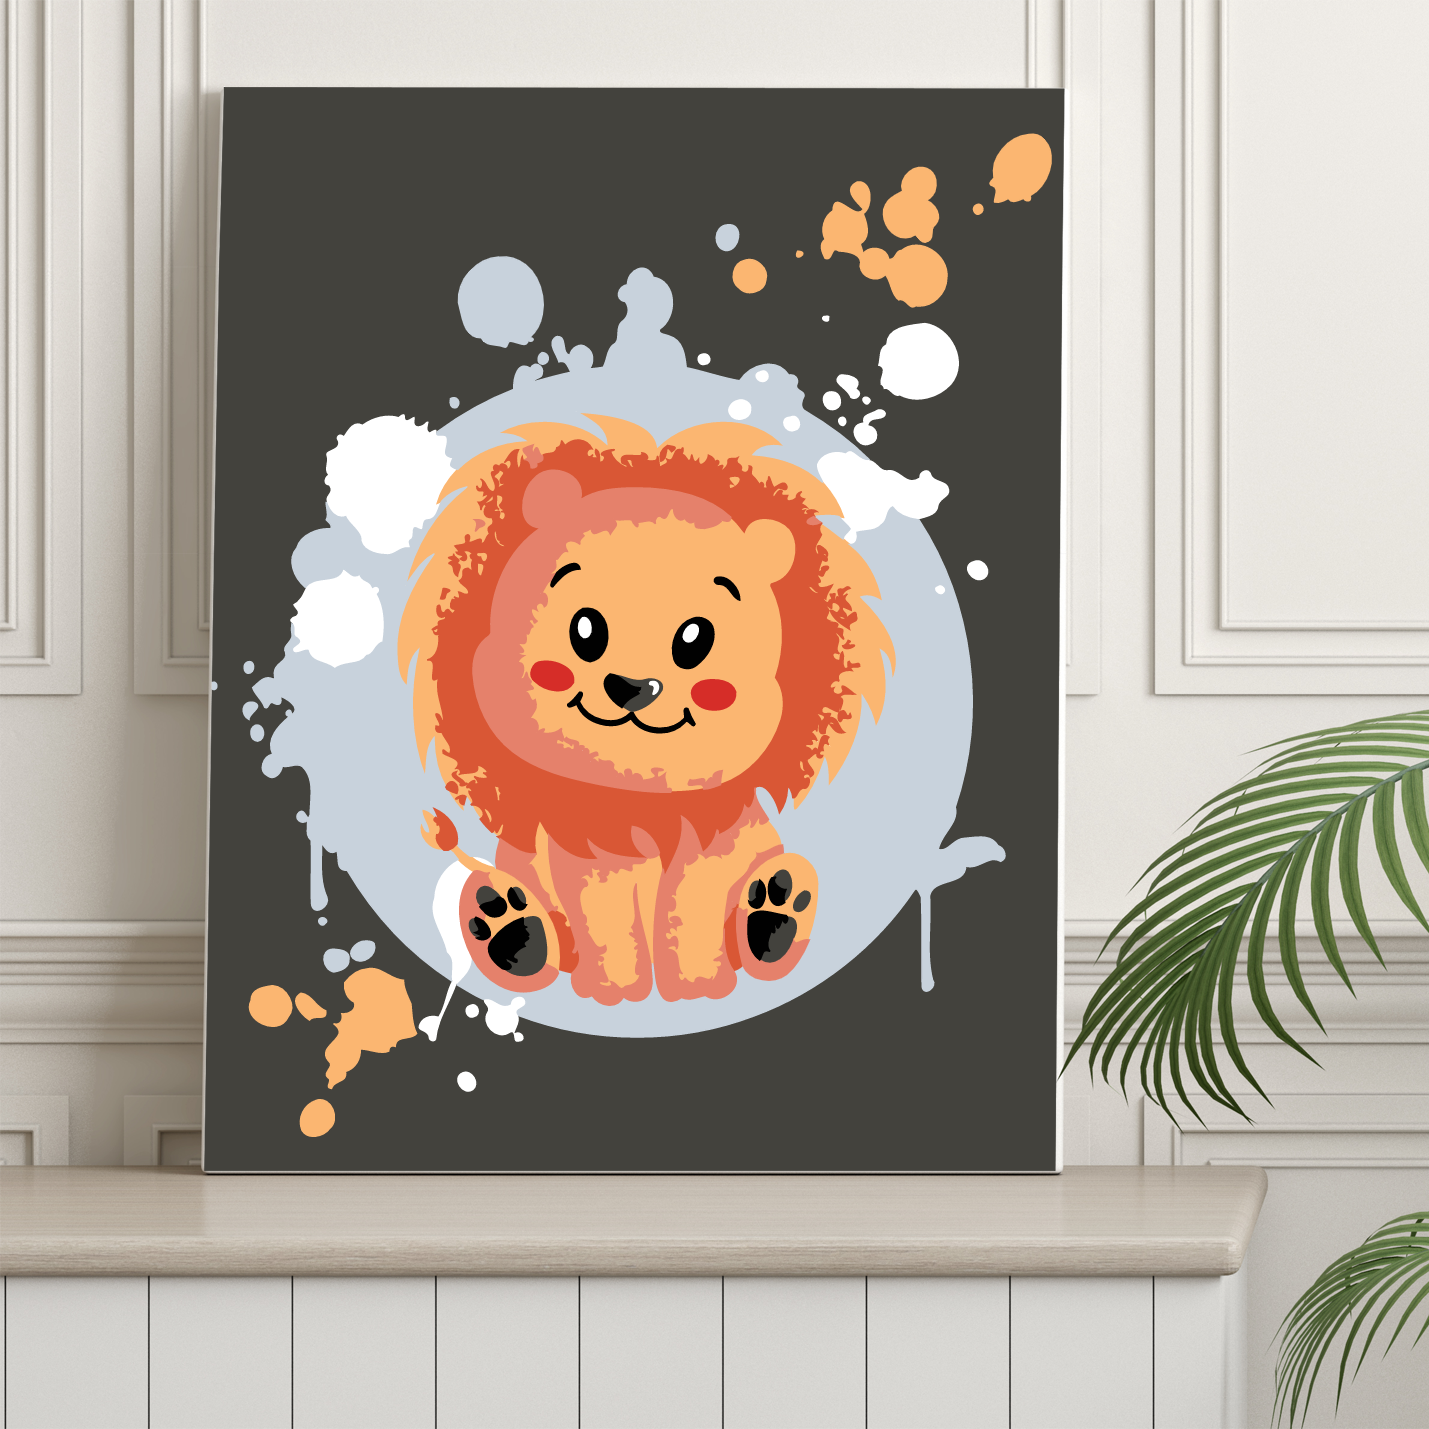 40x50cm Paint by Numbers Kit: Lion's Charm: Cute and Regal